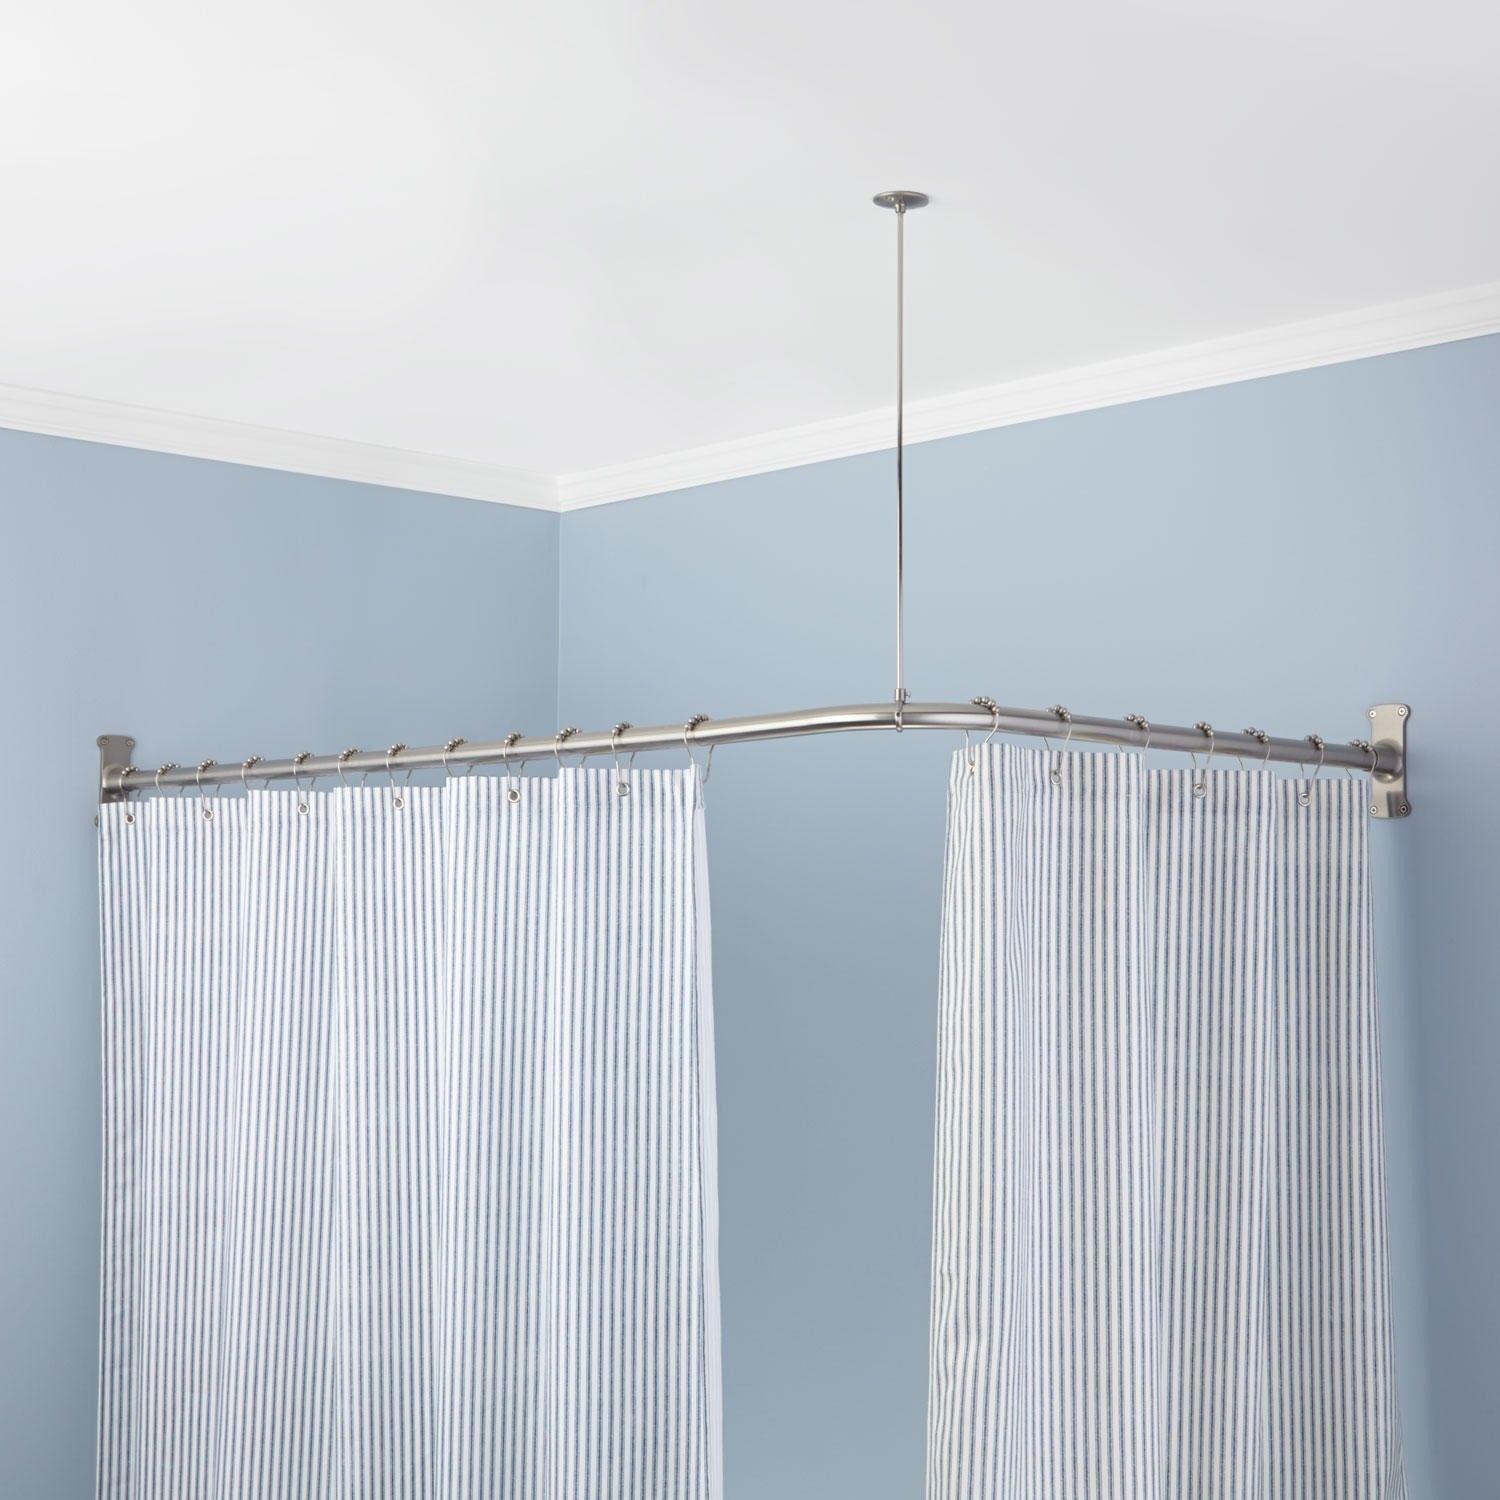 Curtain Best Material Of Bed Bath And Beyond Curtain Rods For With Regard To Shower Curtains Poles (View 2 of 25)